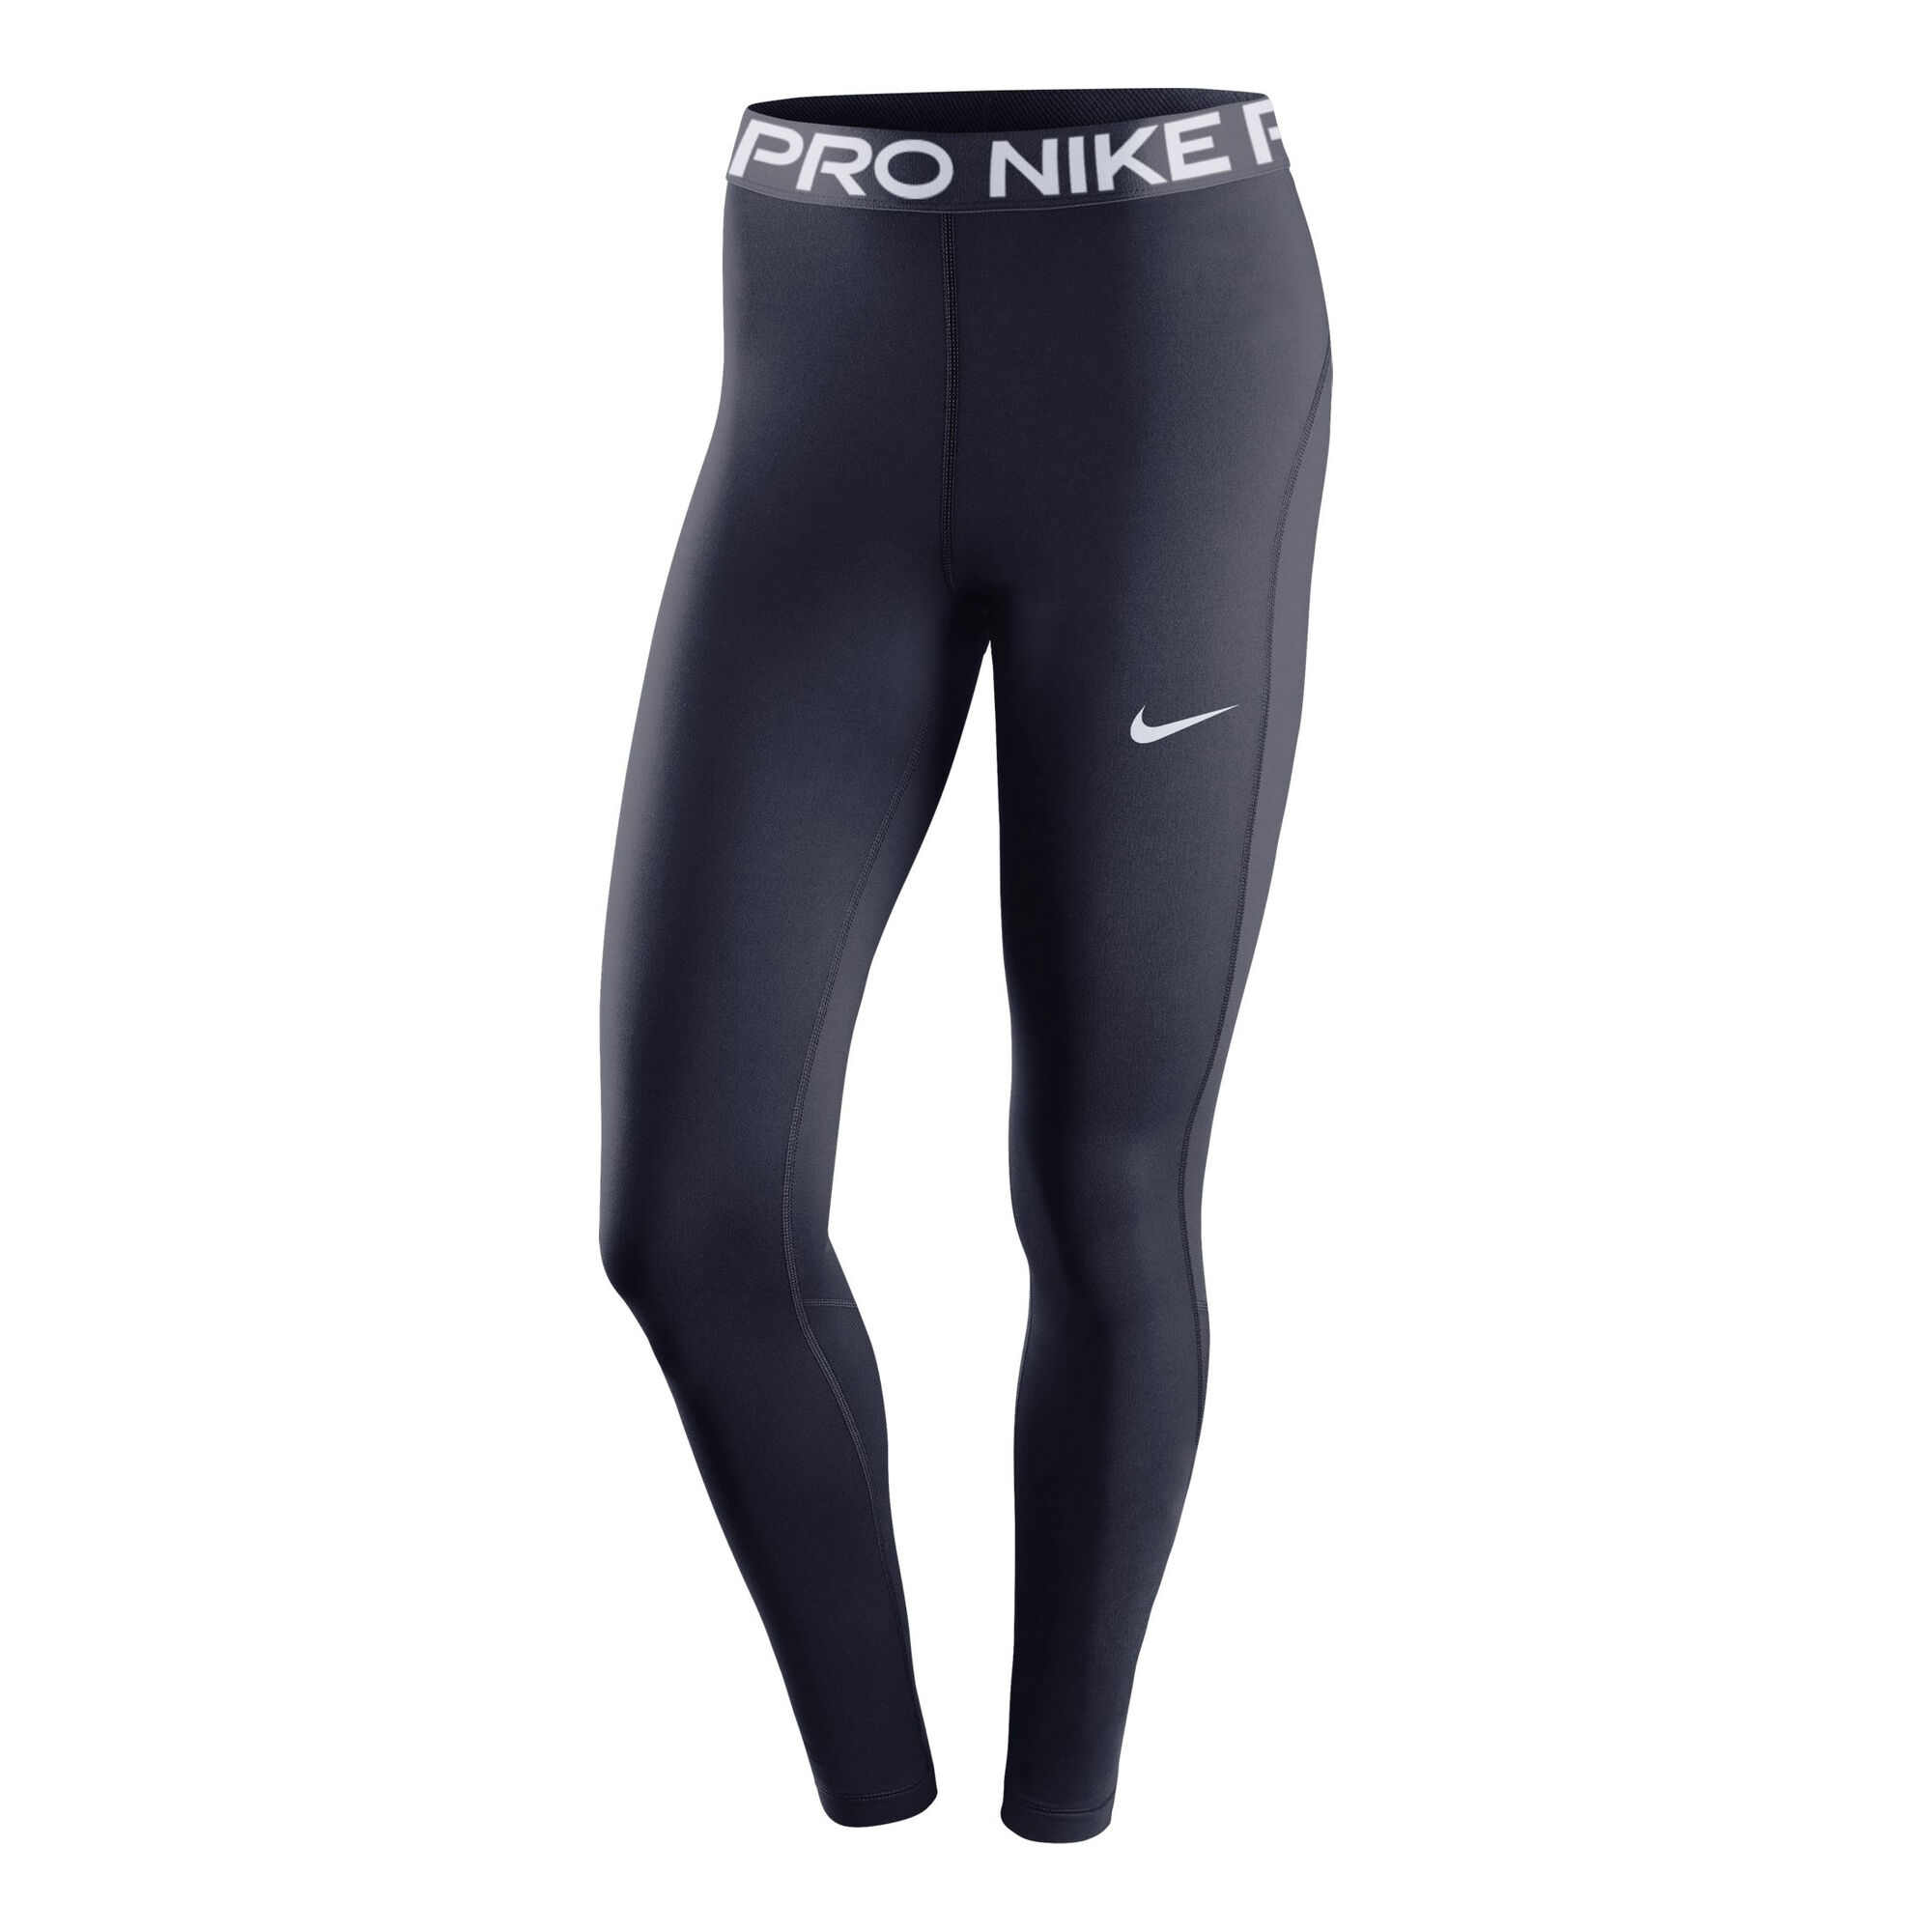 Nike Pro Malla Mujeres - Oscuro, Blanco compra online | Tennis-Point